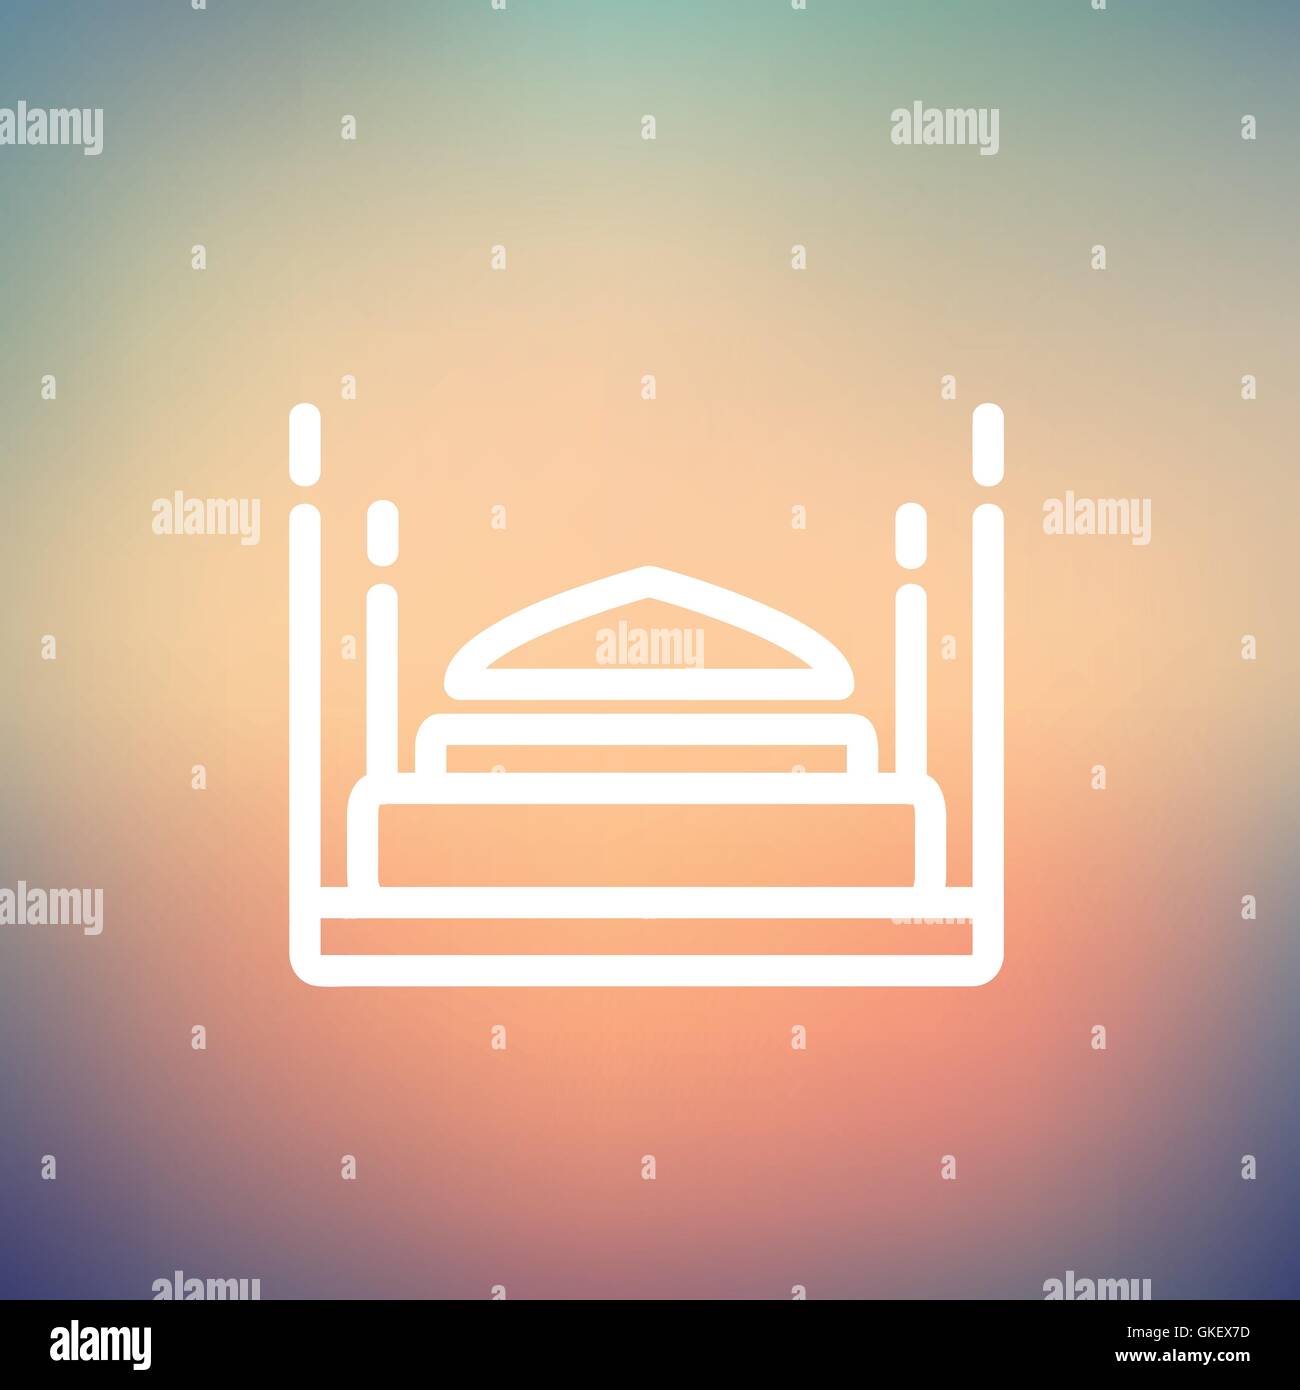 Bed thin line icon Stock Vector